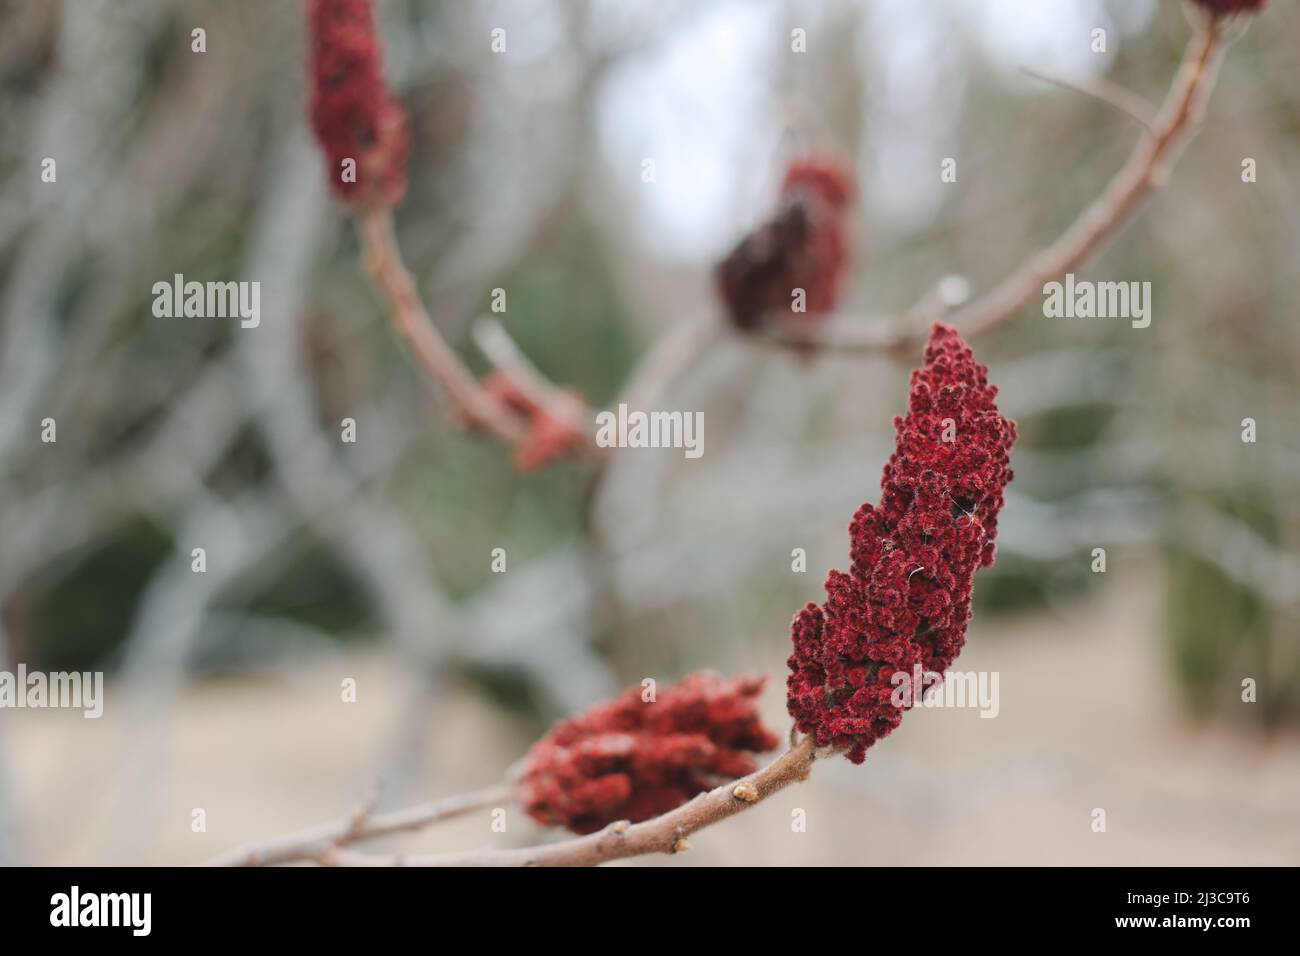 Close-up of a brown-red vinegar tree blossom. Staghorn sumac branch with seeds against blue sky. Rhus coriaria, Sicilian sumac, tanner's sumach, or Stock Photo